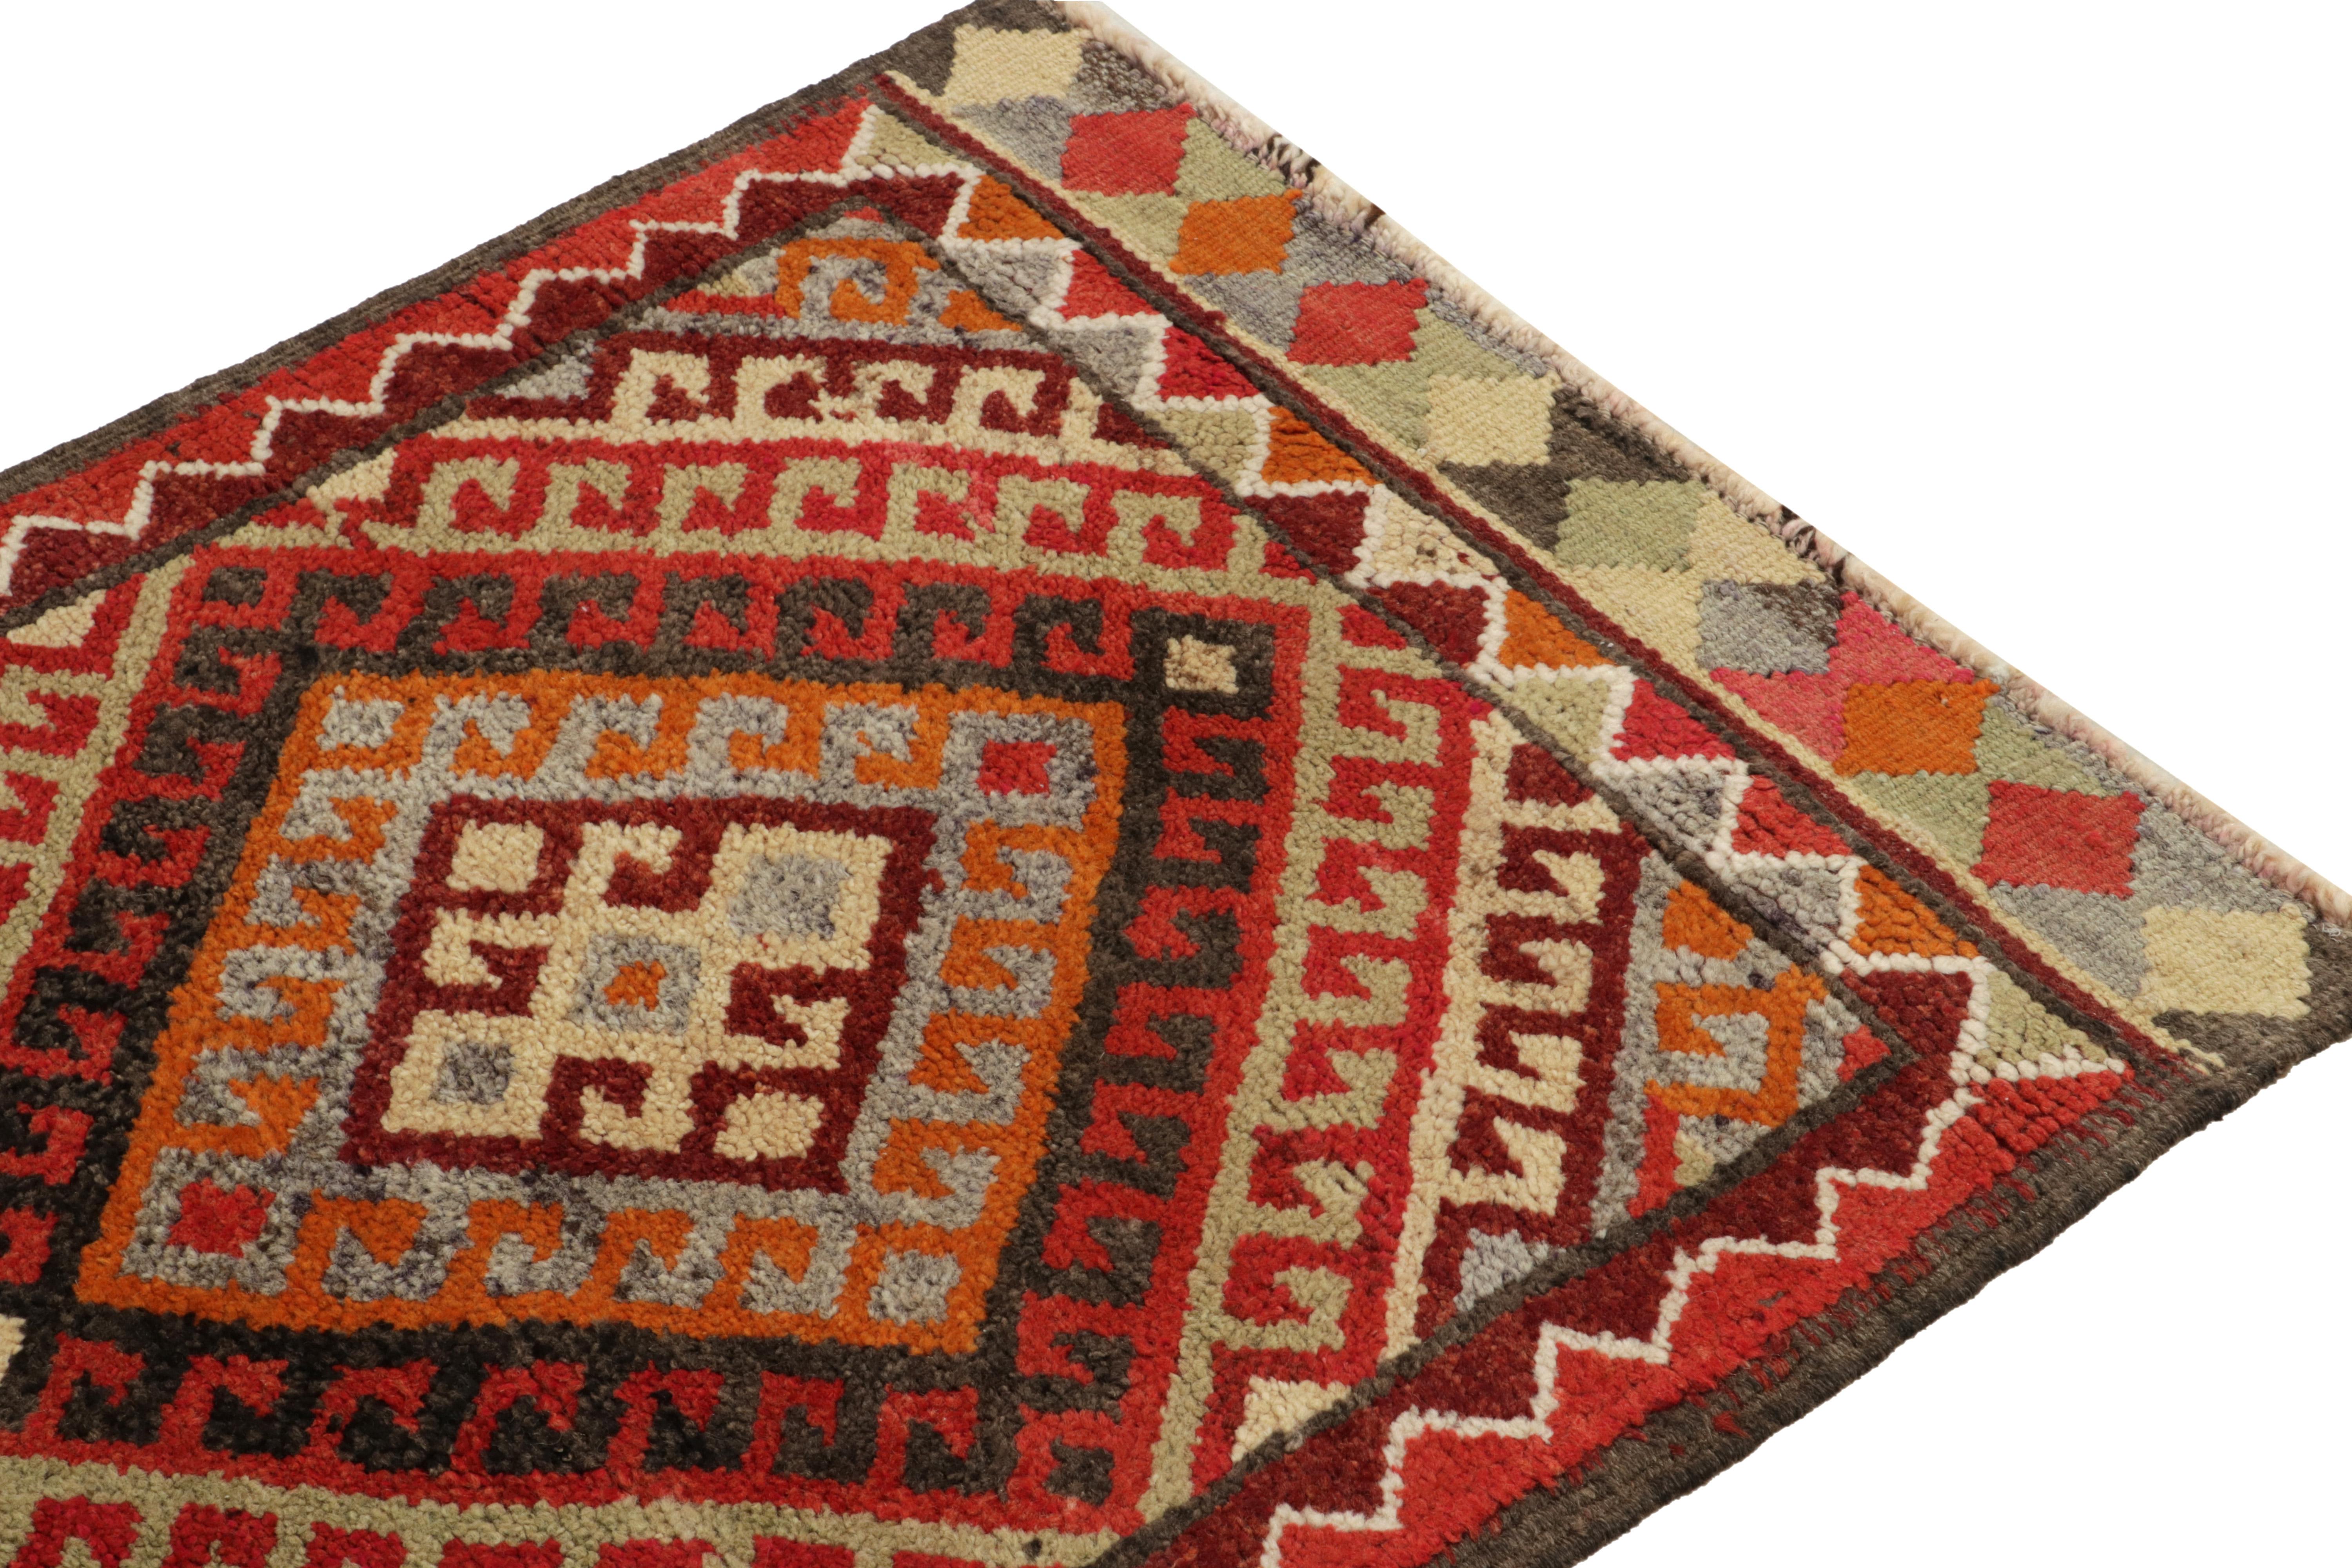 1950s Vintage Tribal Runner in Red Orange Brown Geometric Pattern by Rug & Kilim In Good Condition For Sale In Long Island City, NY